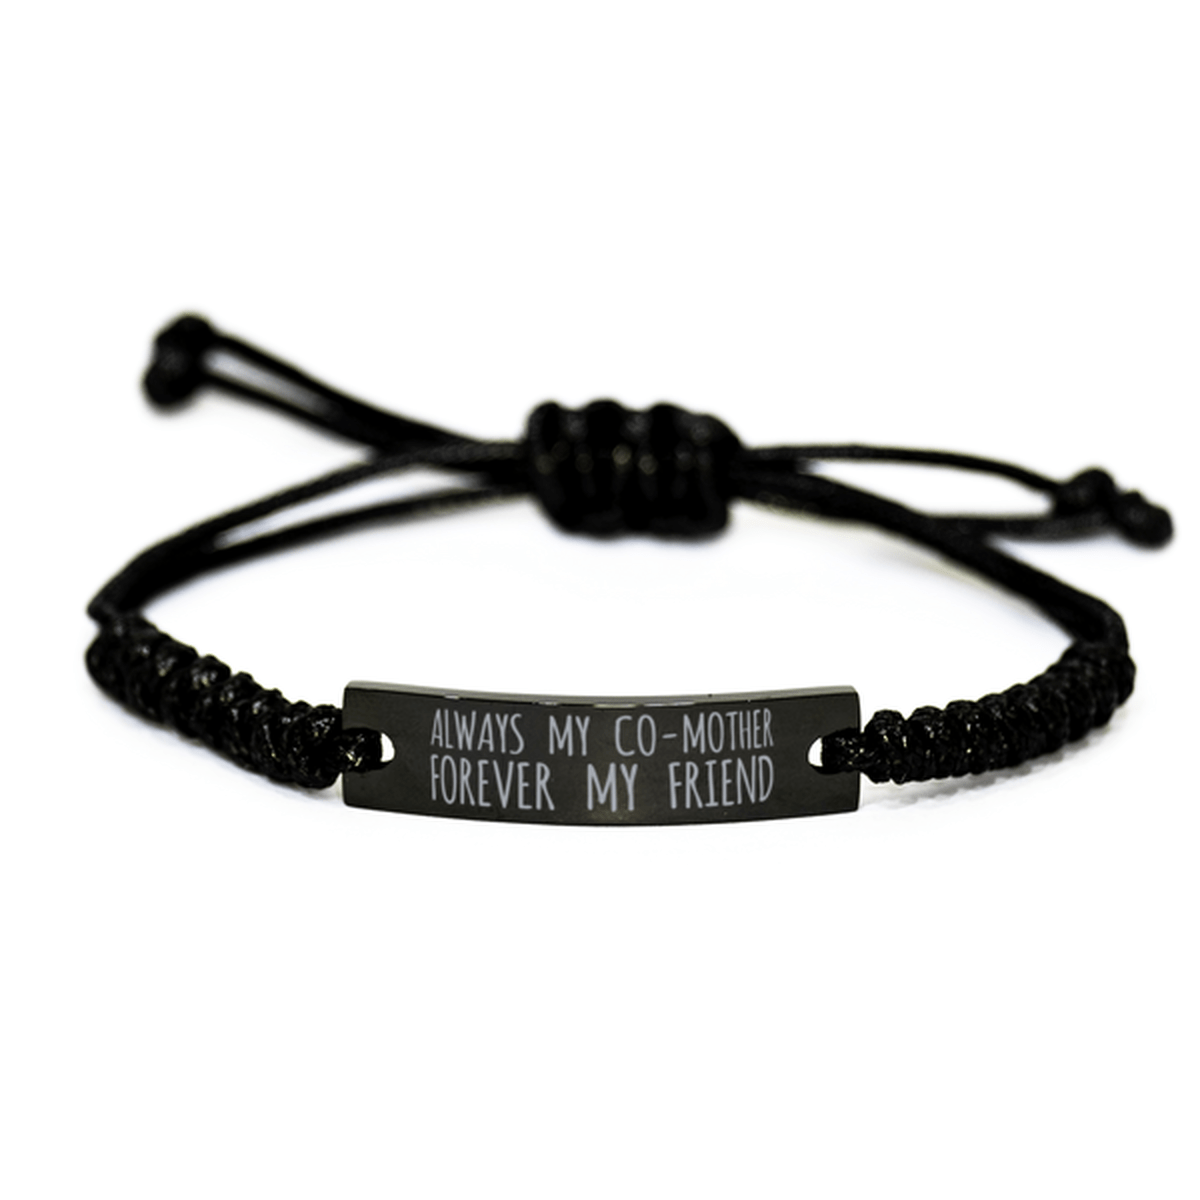 Inspirational Co-Mother Black Rope Bracelet, Always My Co-Mother Forever My Friend, Best Birthday Gifts For Family